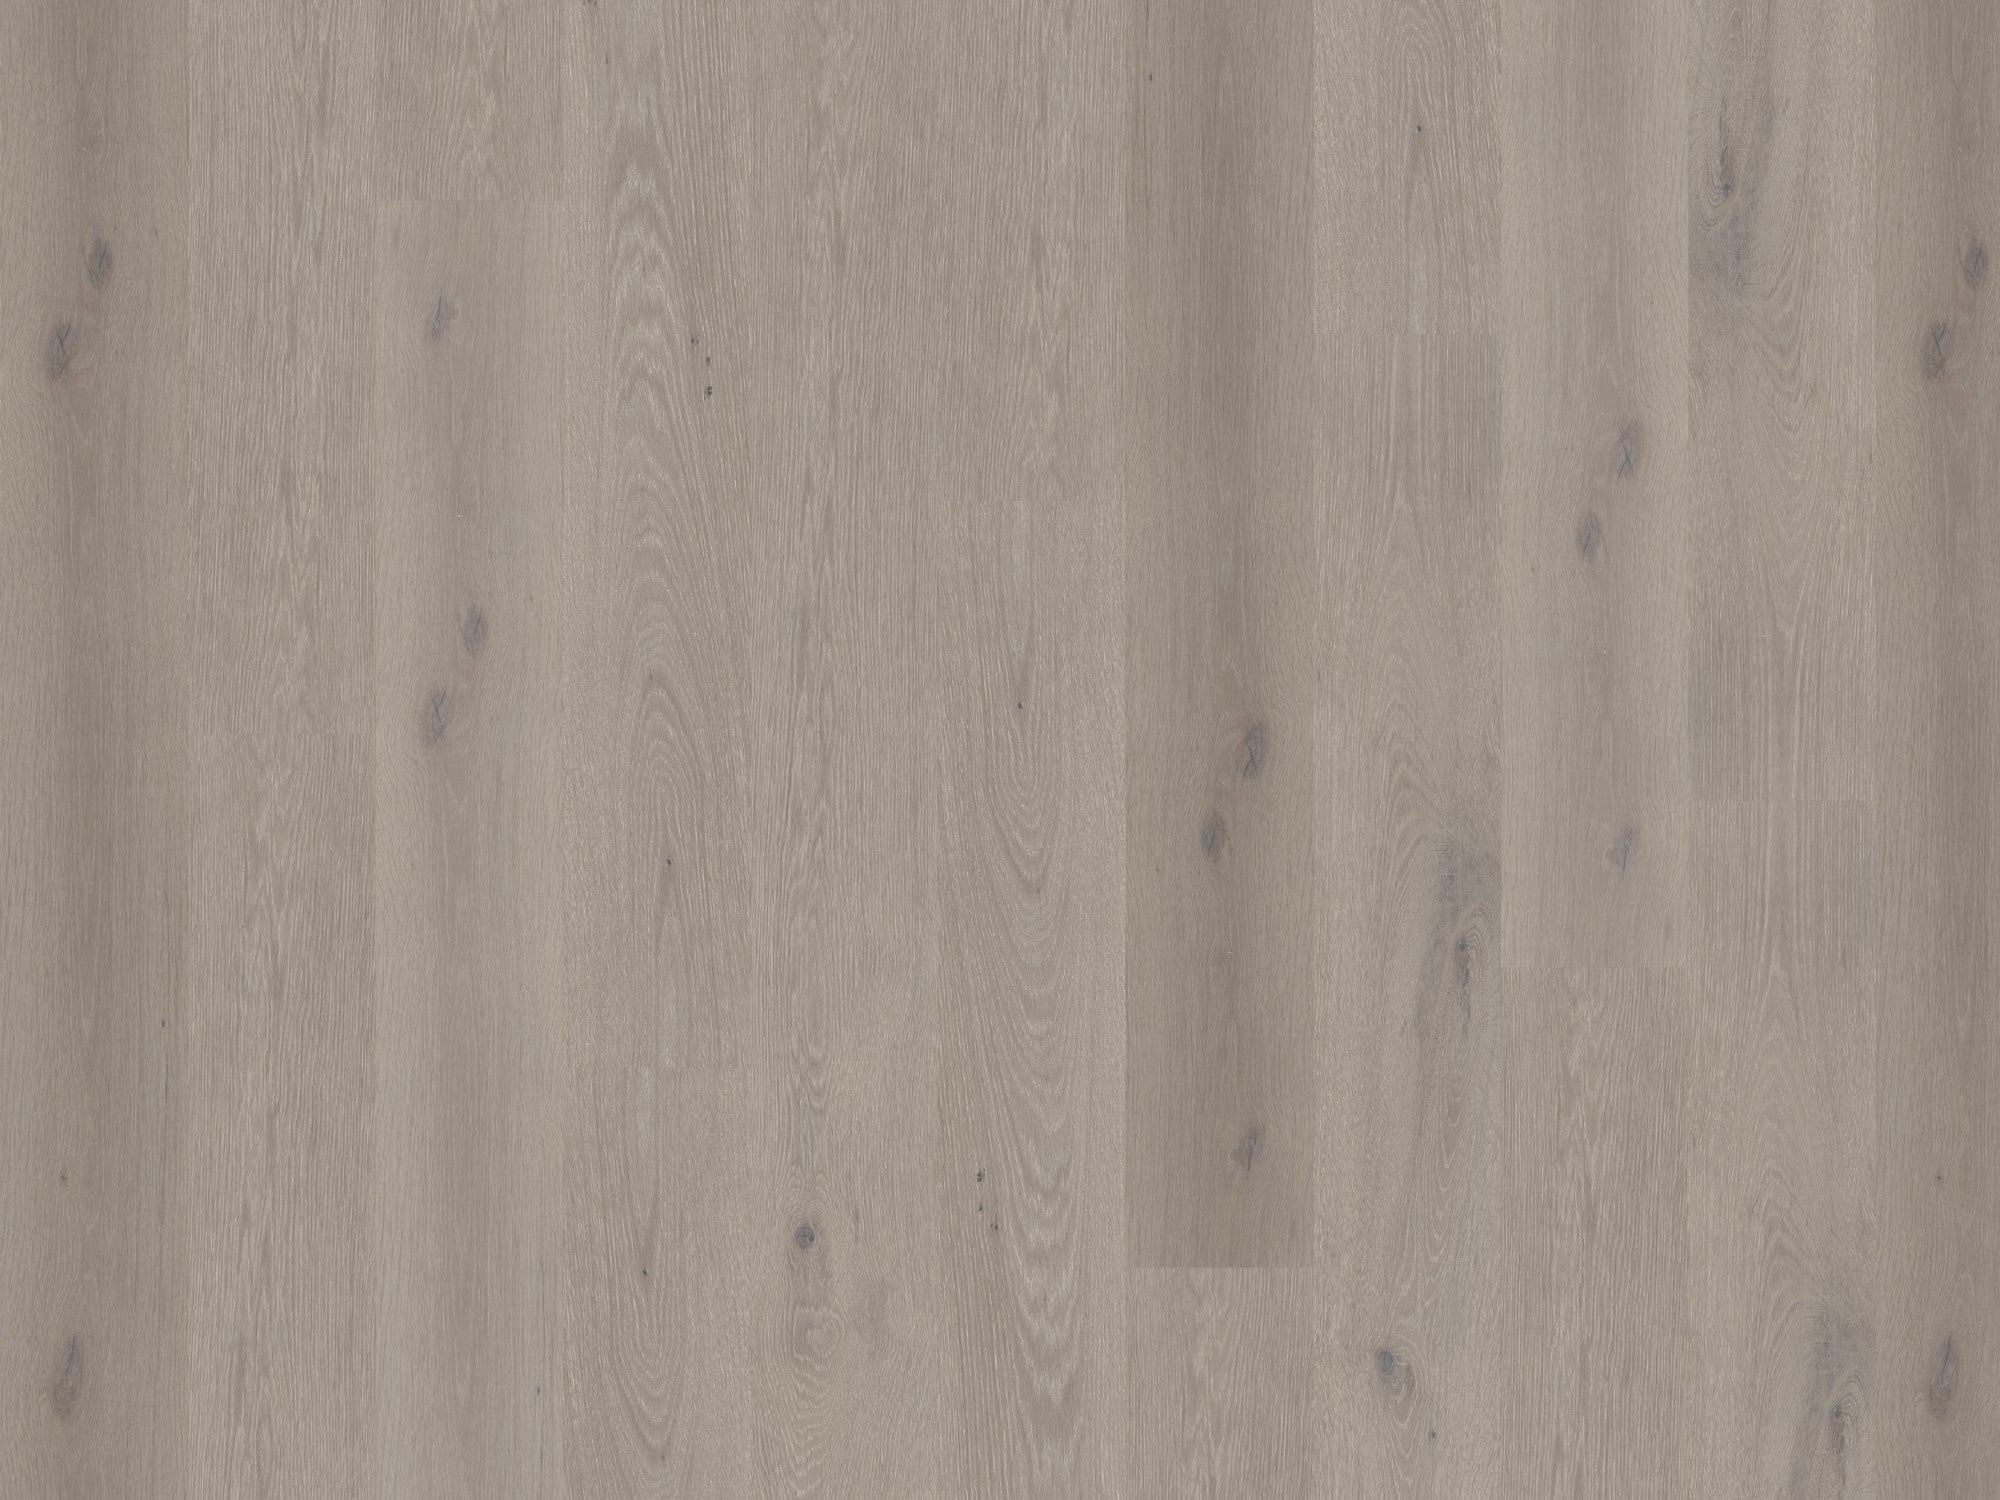 duchateau signature global winds levante european oak engineered hardnatural wood floor uv lacquer finish for interior use distributed by surface group international